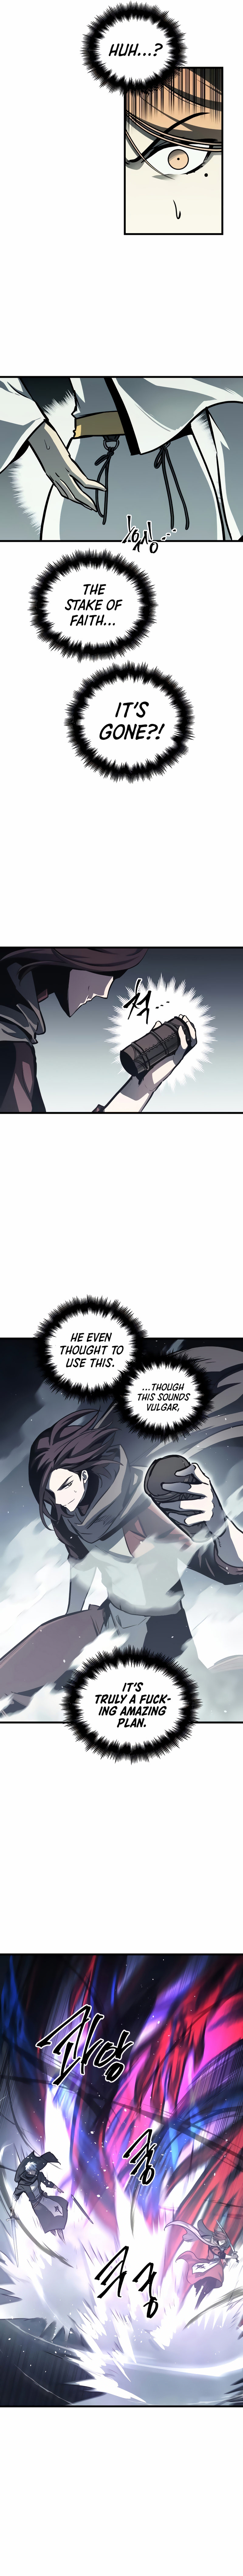 Reincarnation of the Suicidal Battle God - Chapter 26 Page 9